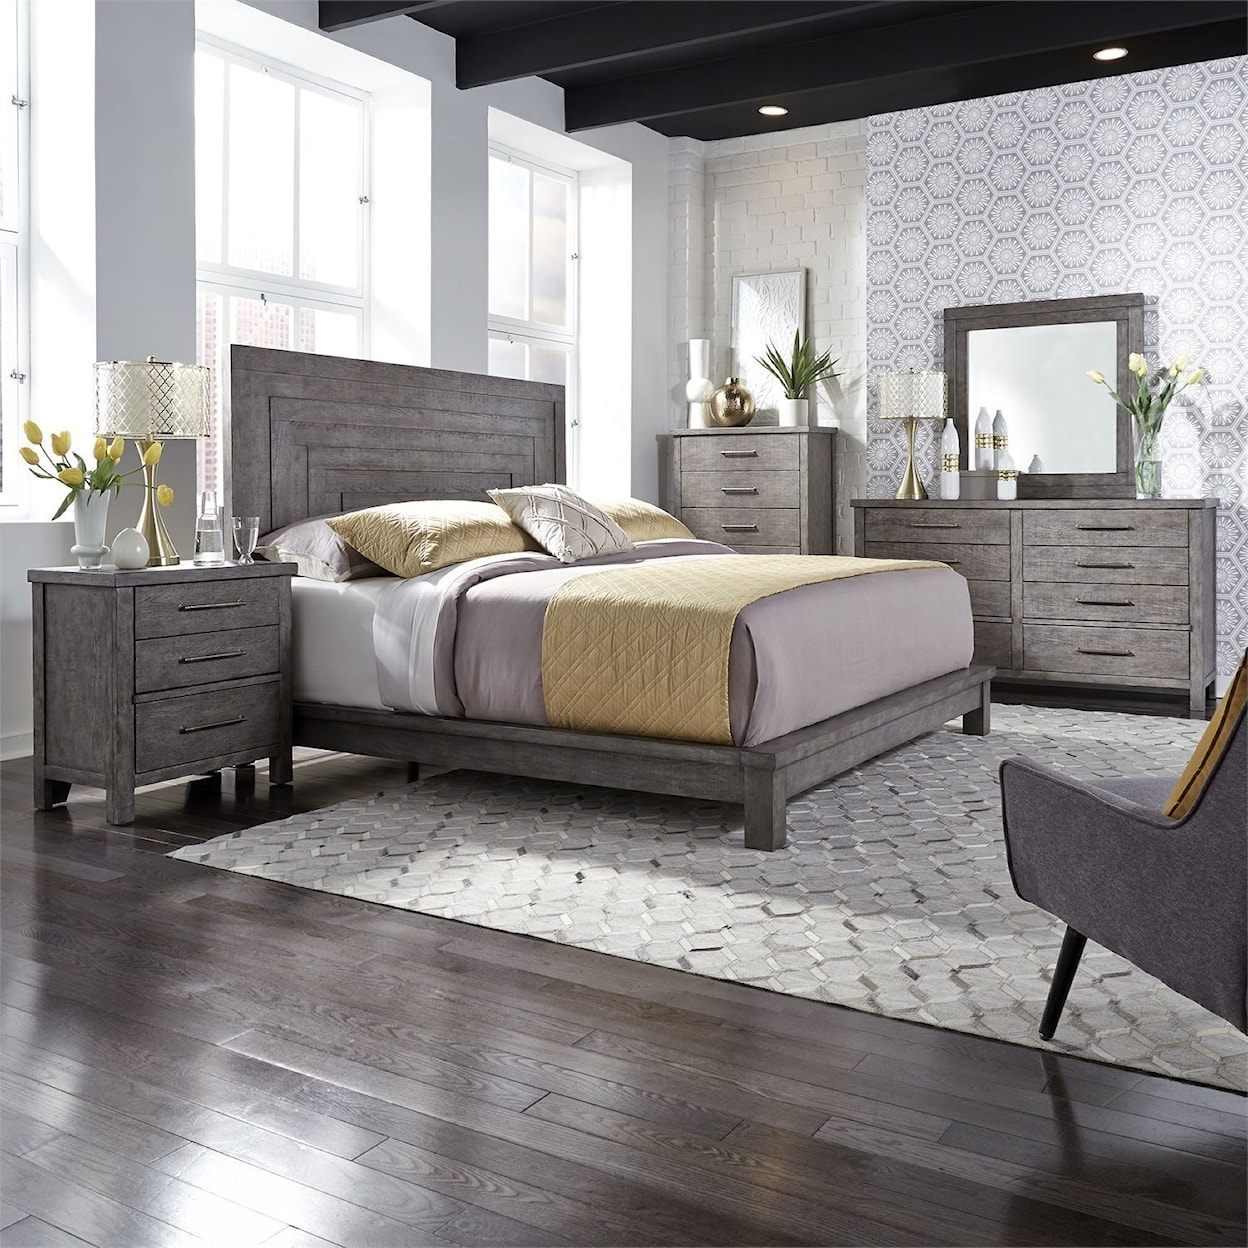 Liberty Furniture Modern Farmhouse Queen Bedroom Group